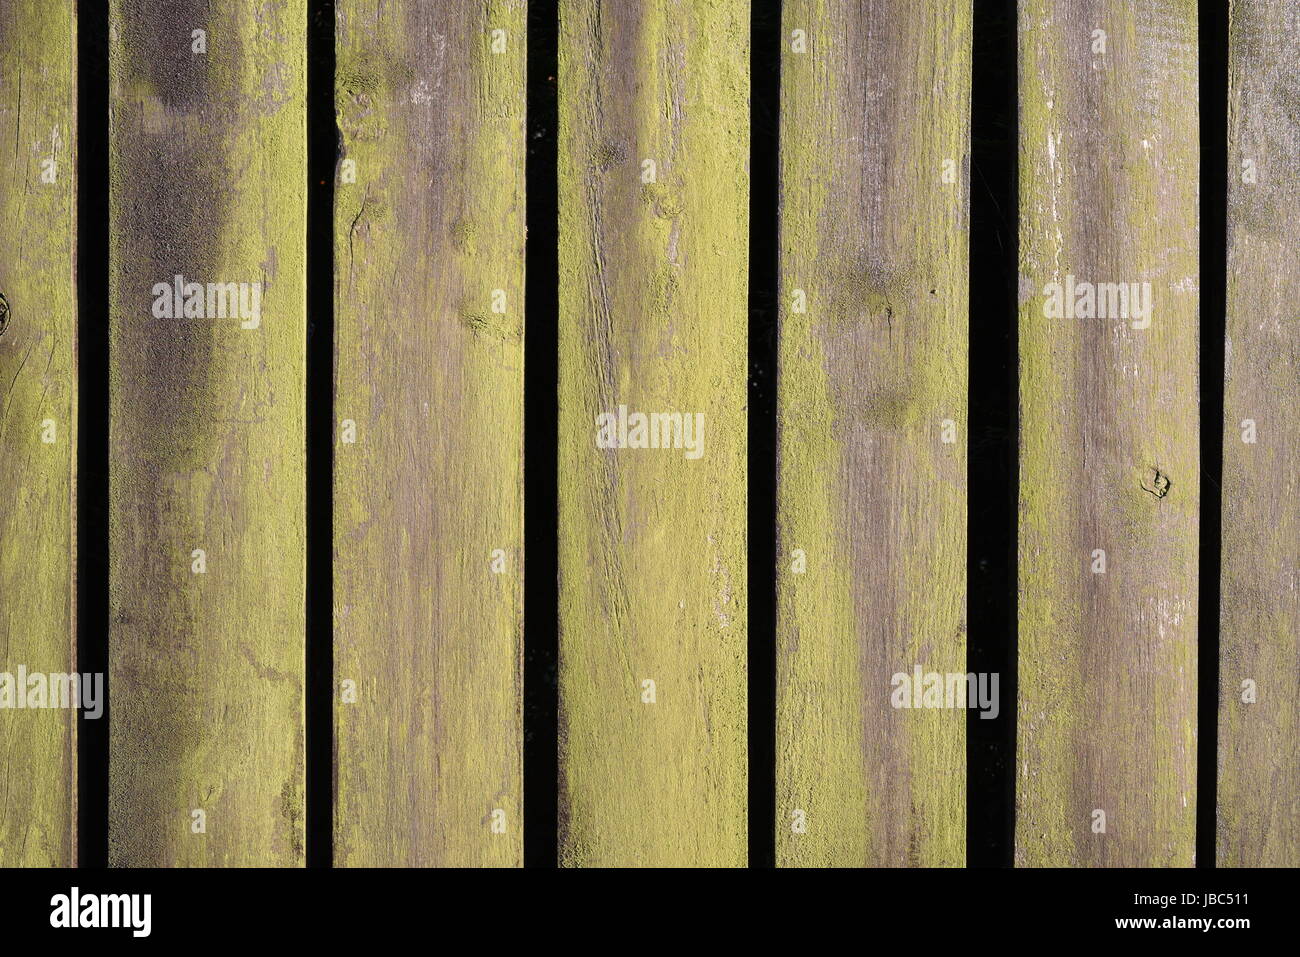 Wooden fence as background Stock Photo